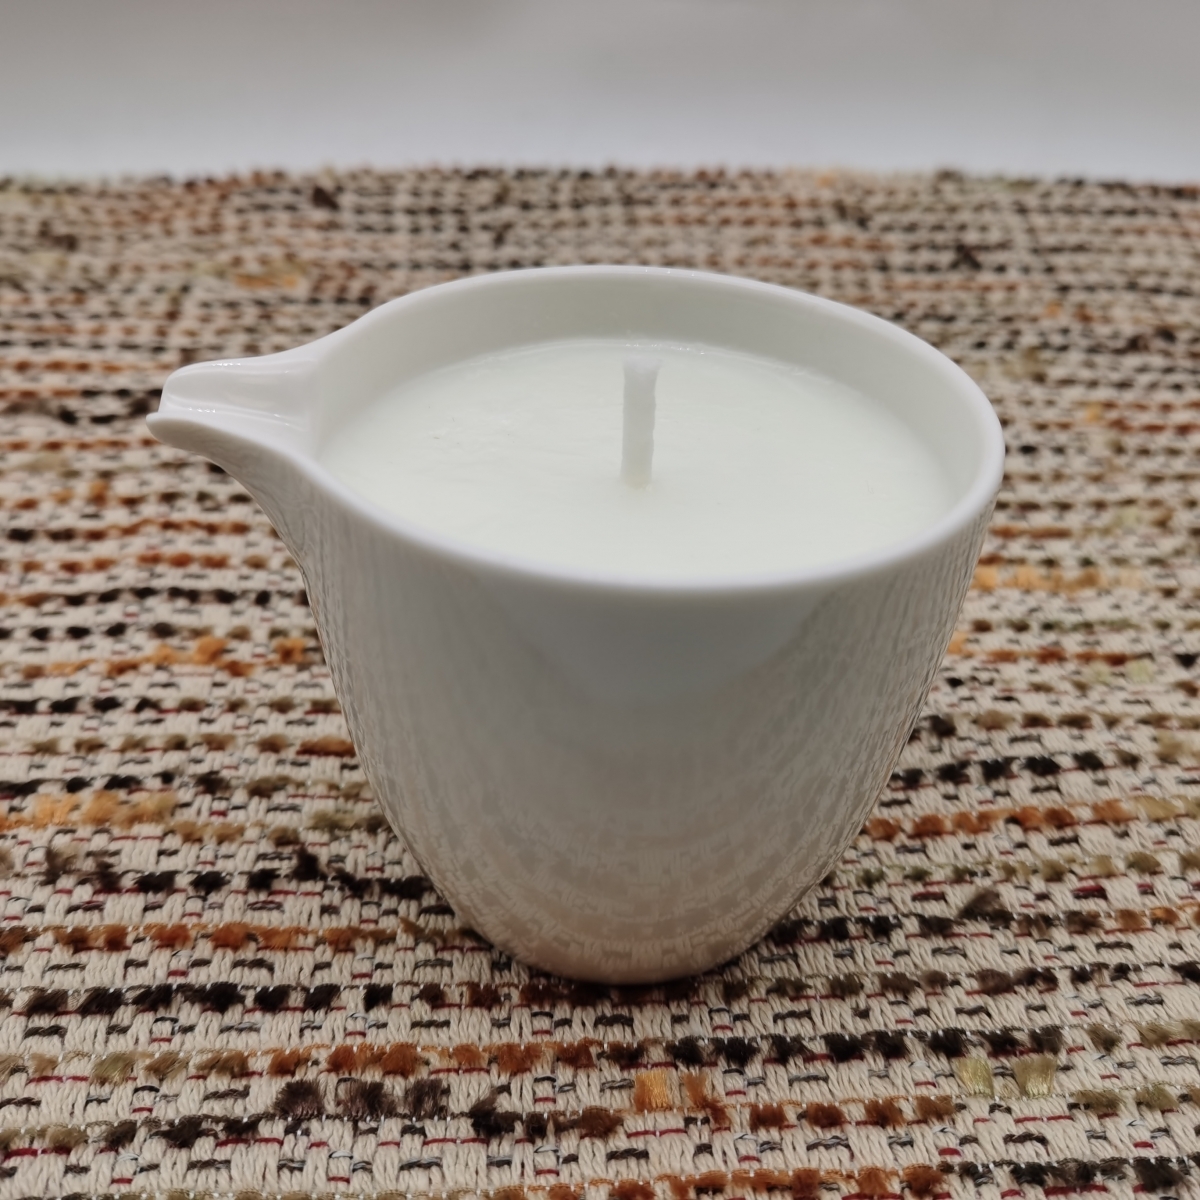 Chanel No 5 Massage Candles – Recipe Soy Wax ,Ceramic Candle Jar With Spout ,China Factory ,Wholesale Price-HOWCANDLE-Candles,Scented Candles,Aromatherapy Candles,Soy Candles,Vegan Candles,Jar Candles,Pillar Candles,Candle Gift Sets,Essential Oils,Reed Diffuser,Candle Holder,